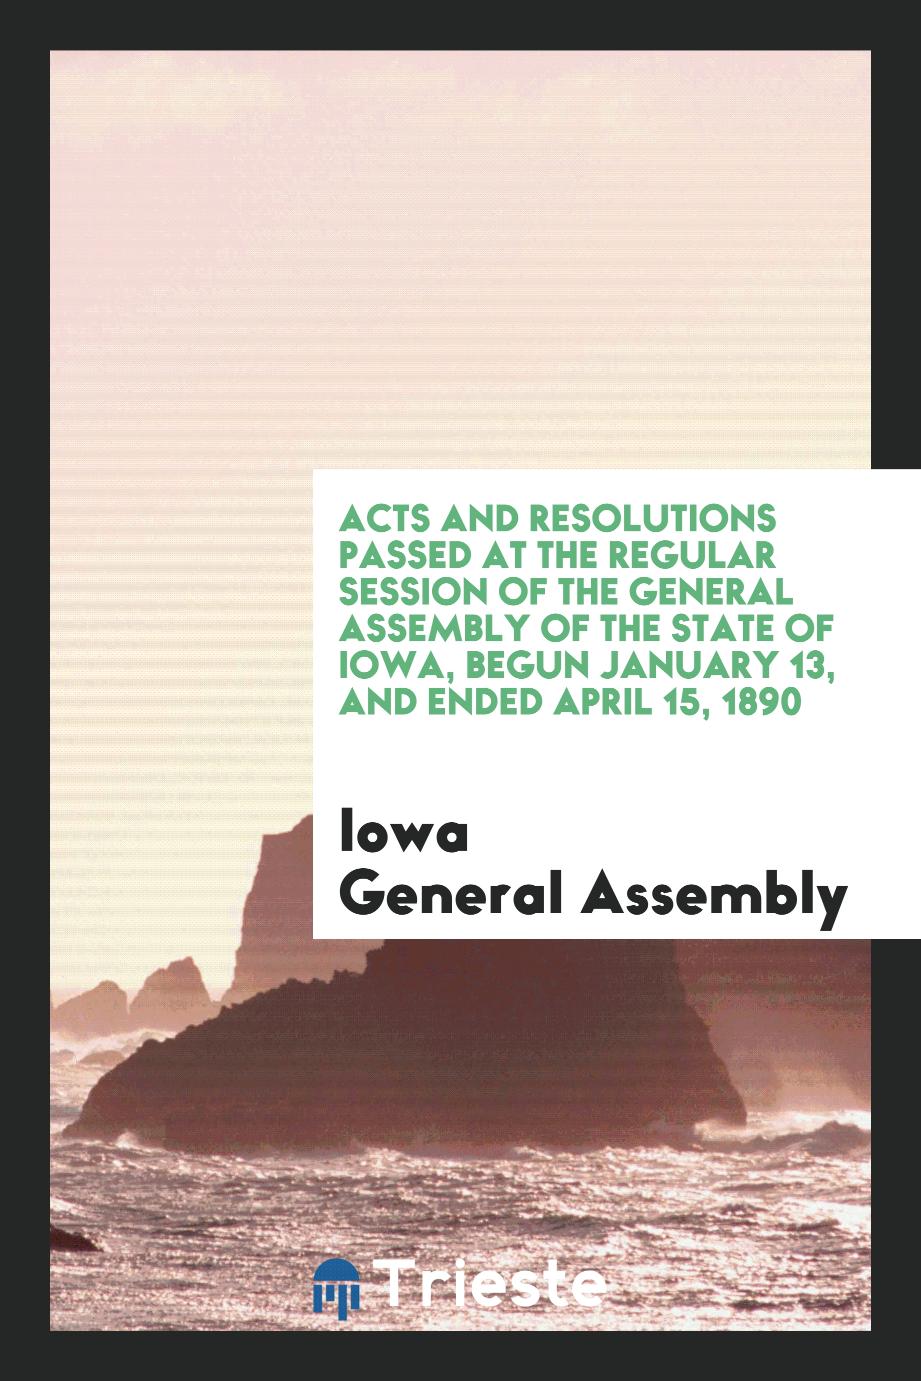 Acts and Resolutions Passed at the Regular Session of the General Assembly of the State of Iowa, Begun January 13, and Ended April 15, 1890